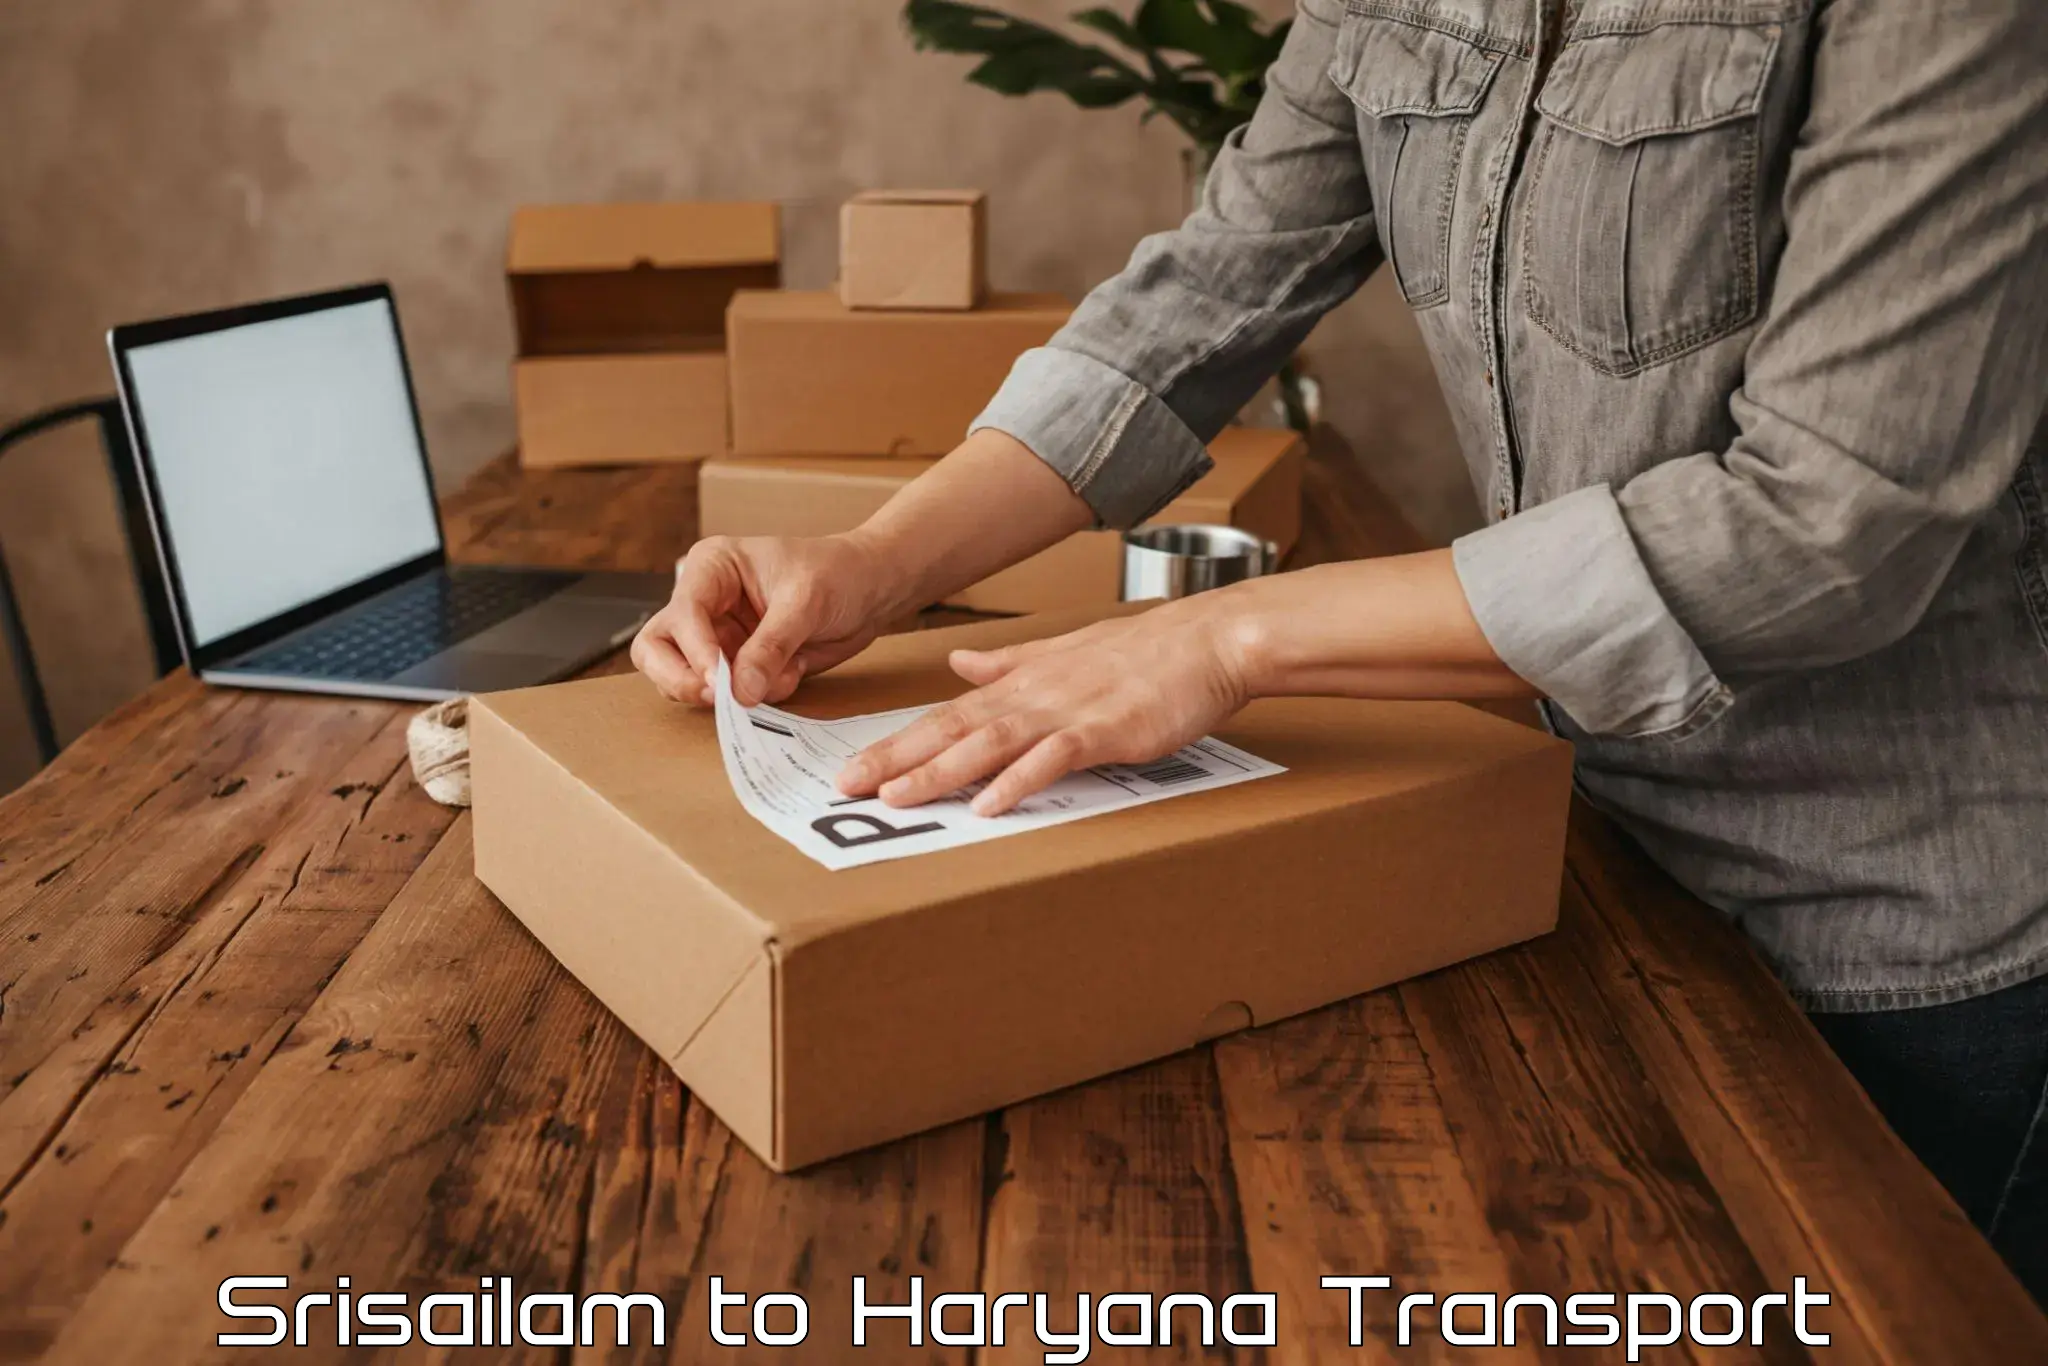 Online transport service Srisailam to NCR Haryana